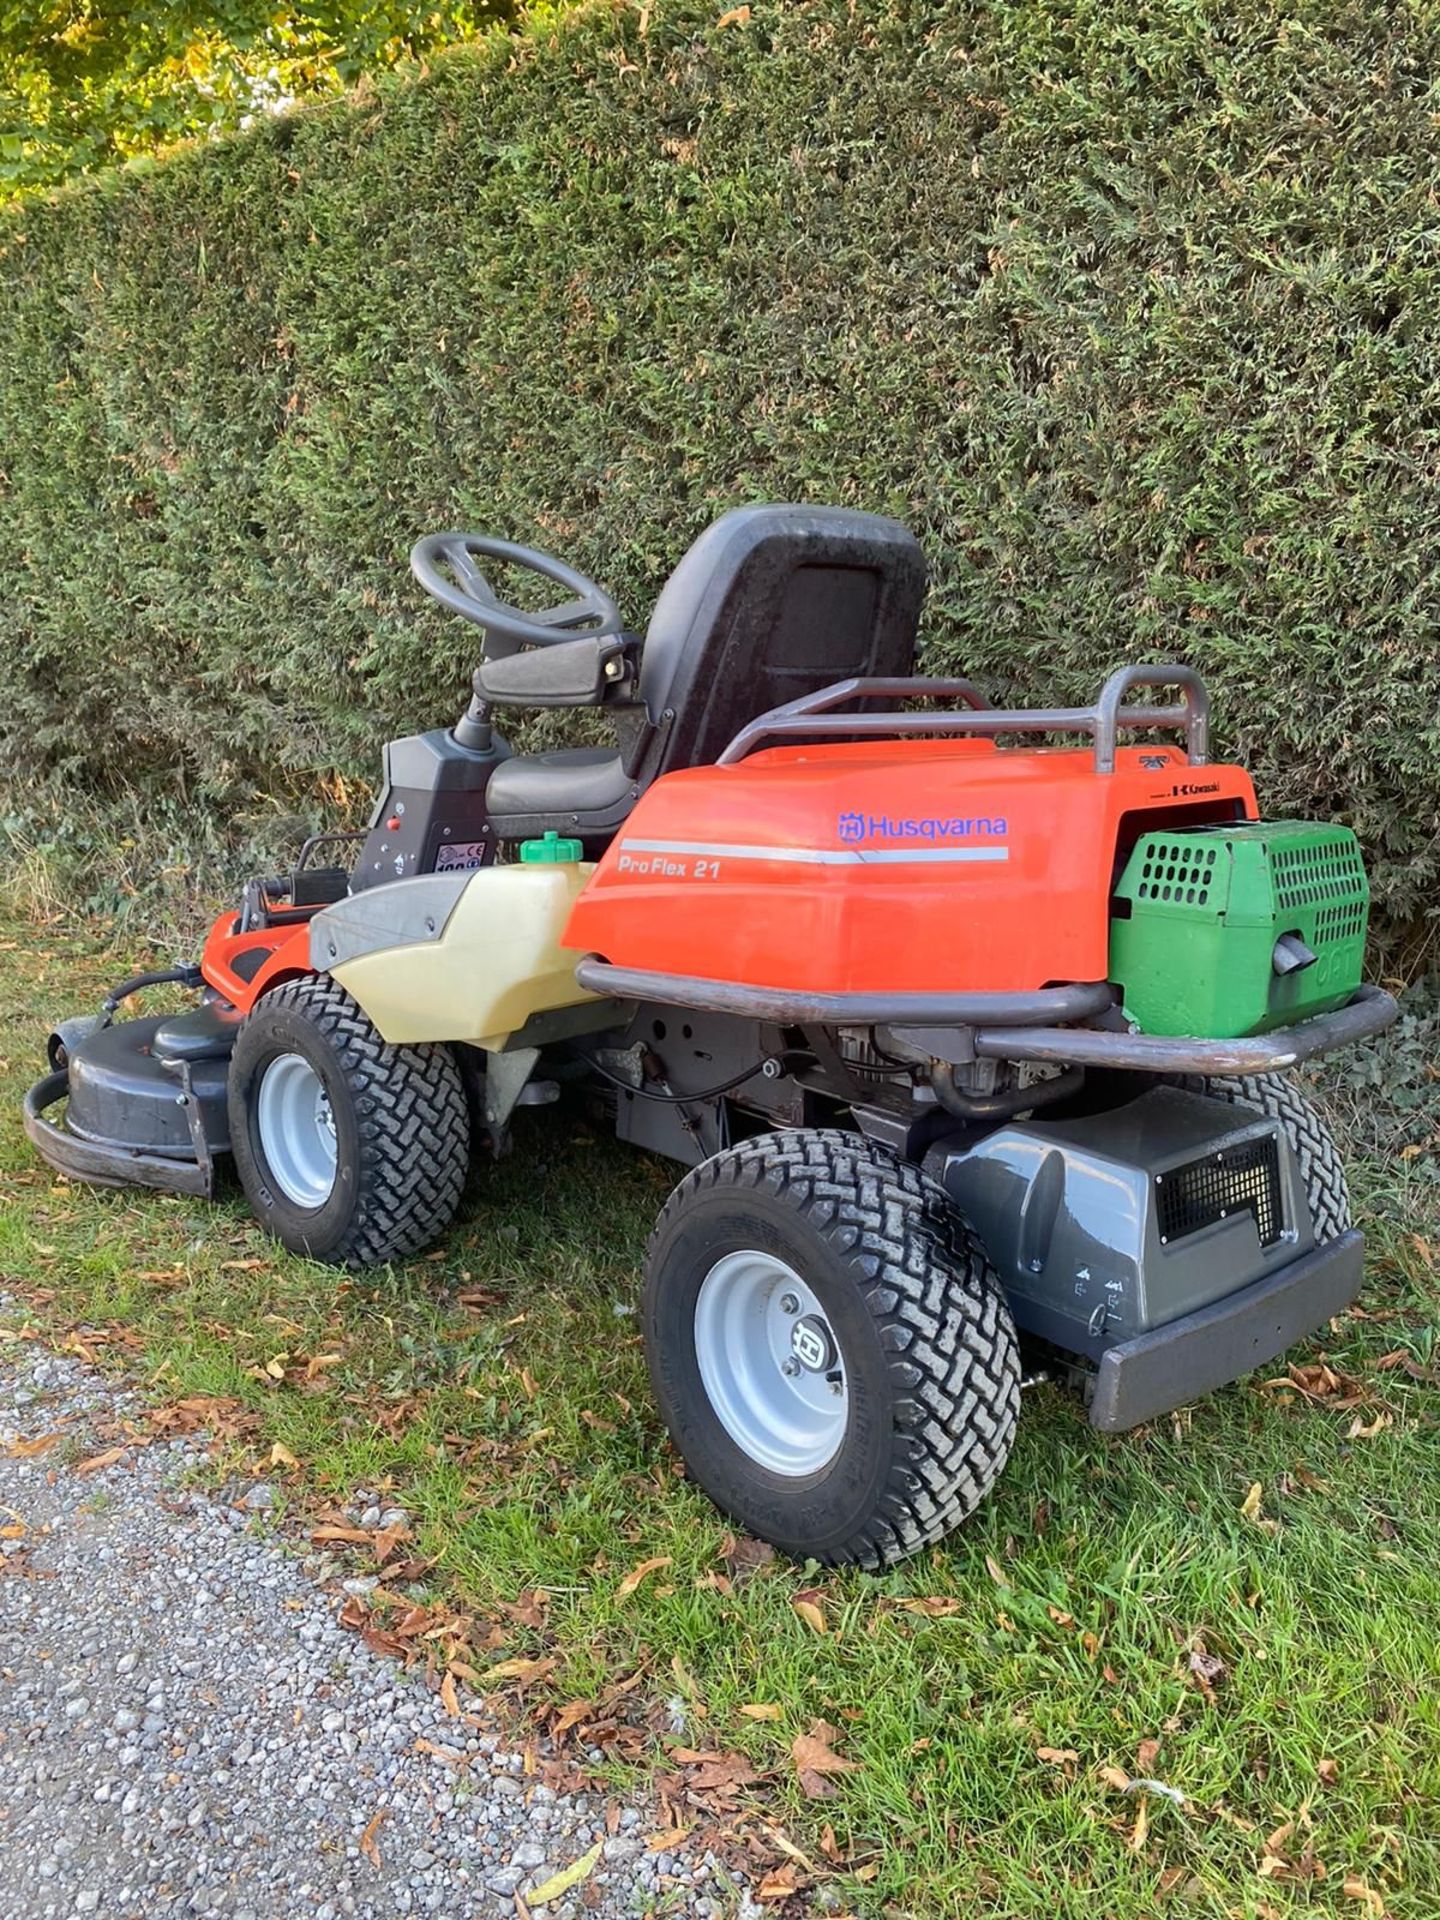 HUSQVARNA PRO FLEX 21 RIDE ON LAWN MOWER, HYDRAULIC UP AND DOWN DECK *NO VAT* - Image 5 of 11